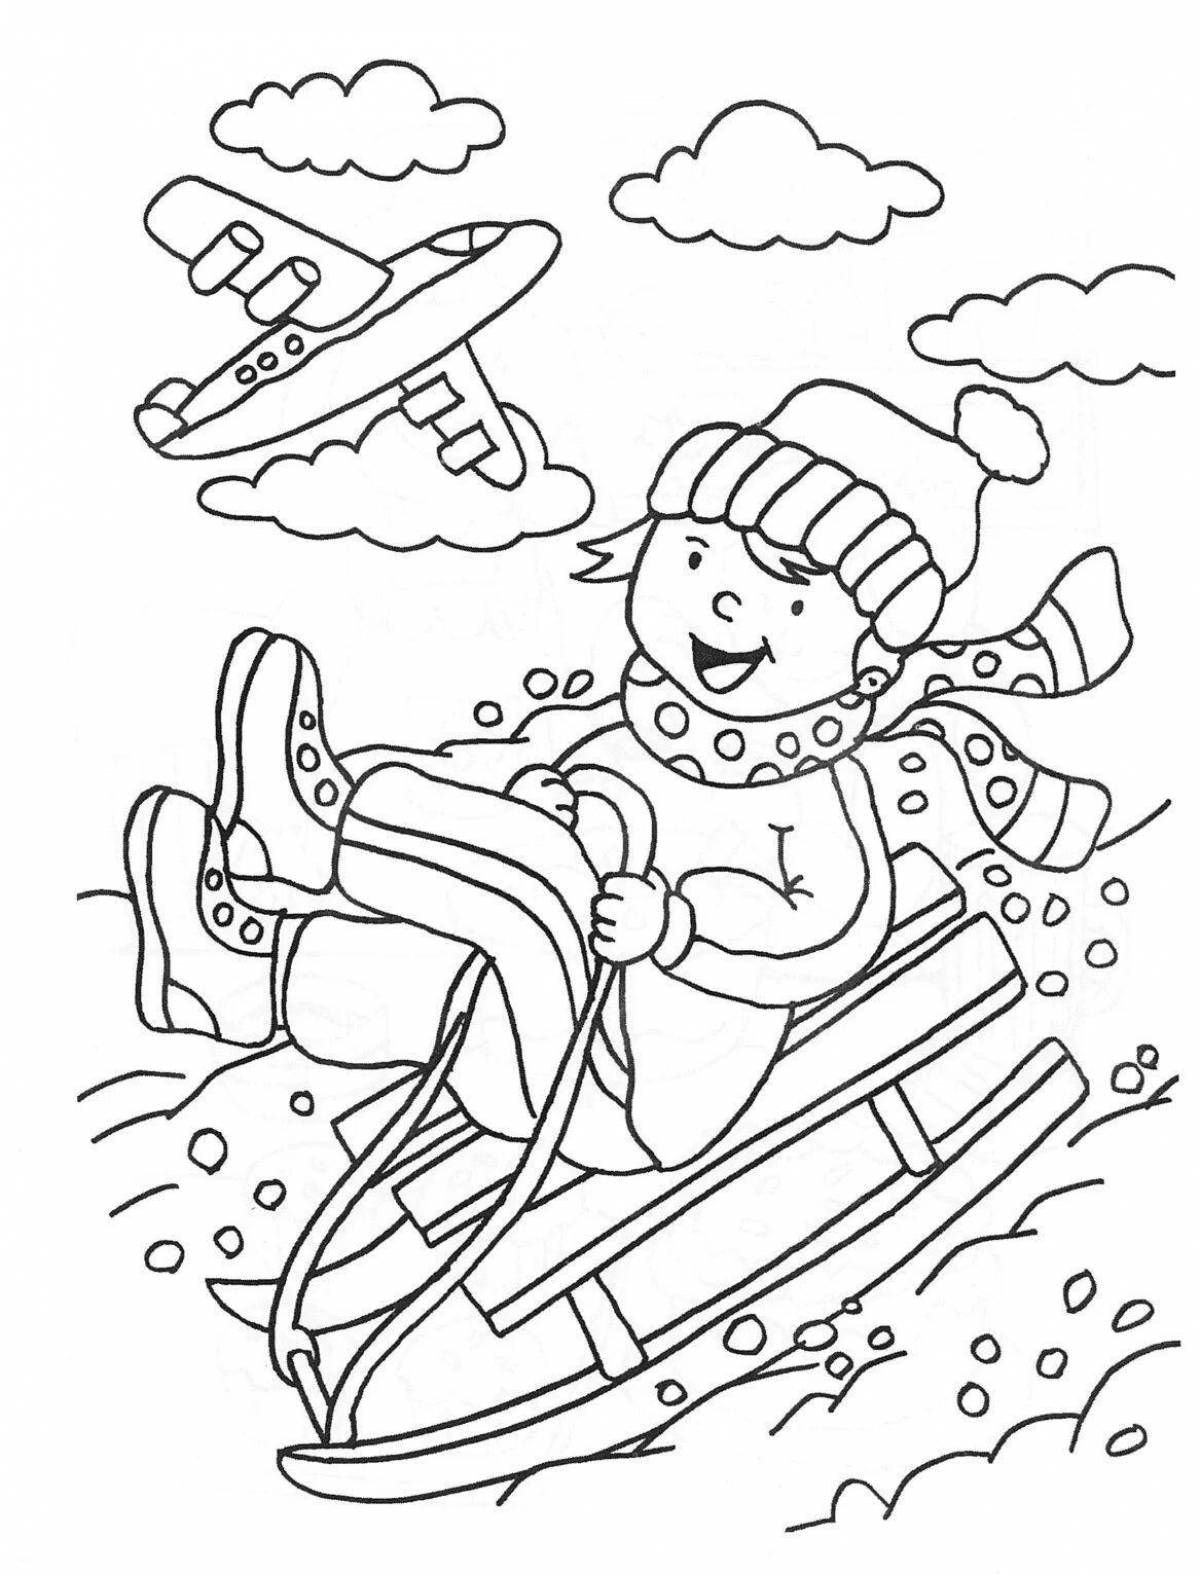 Amazing children's coloring on a sled